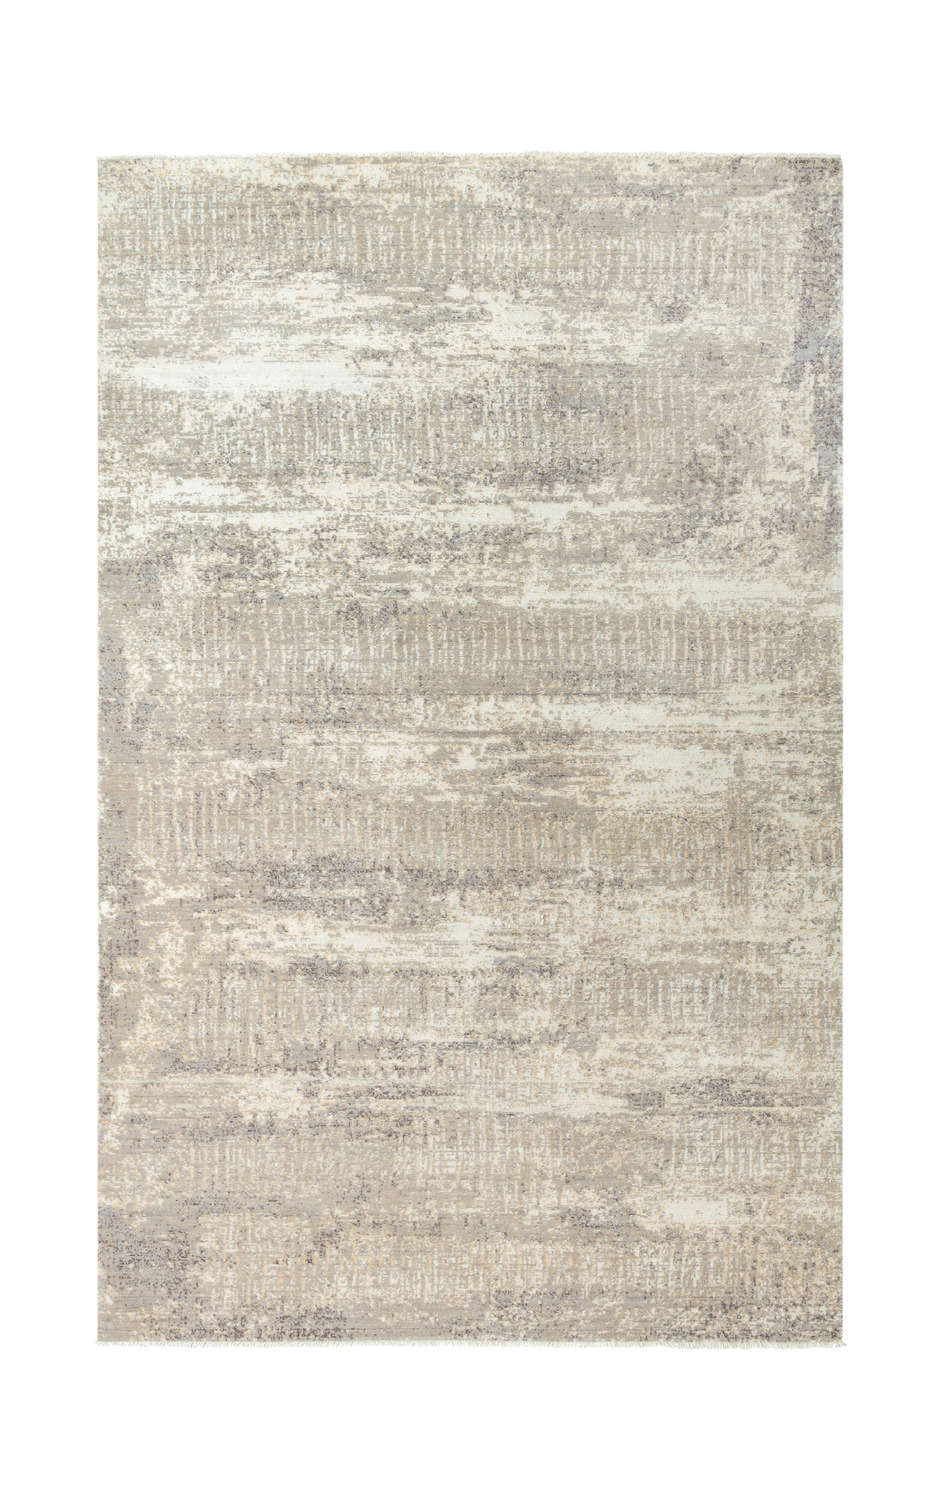 Couture Beige Brown Area Rug - 8 0  X 10 0 